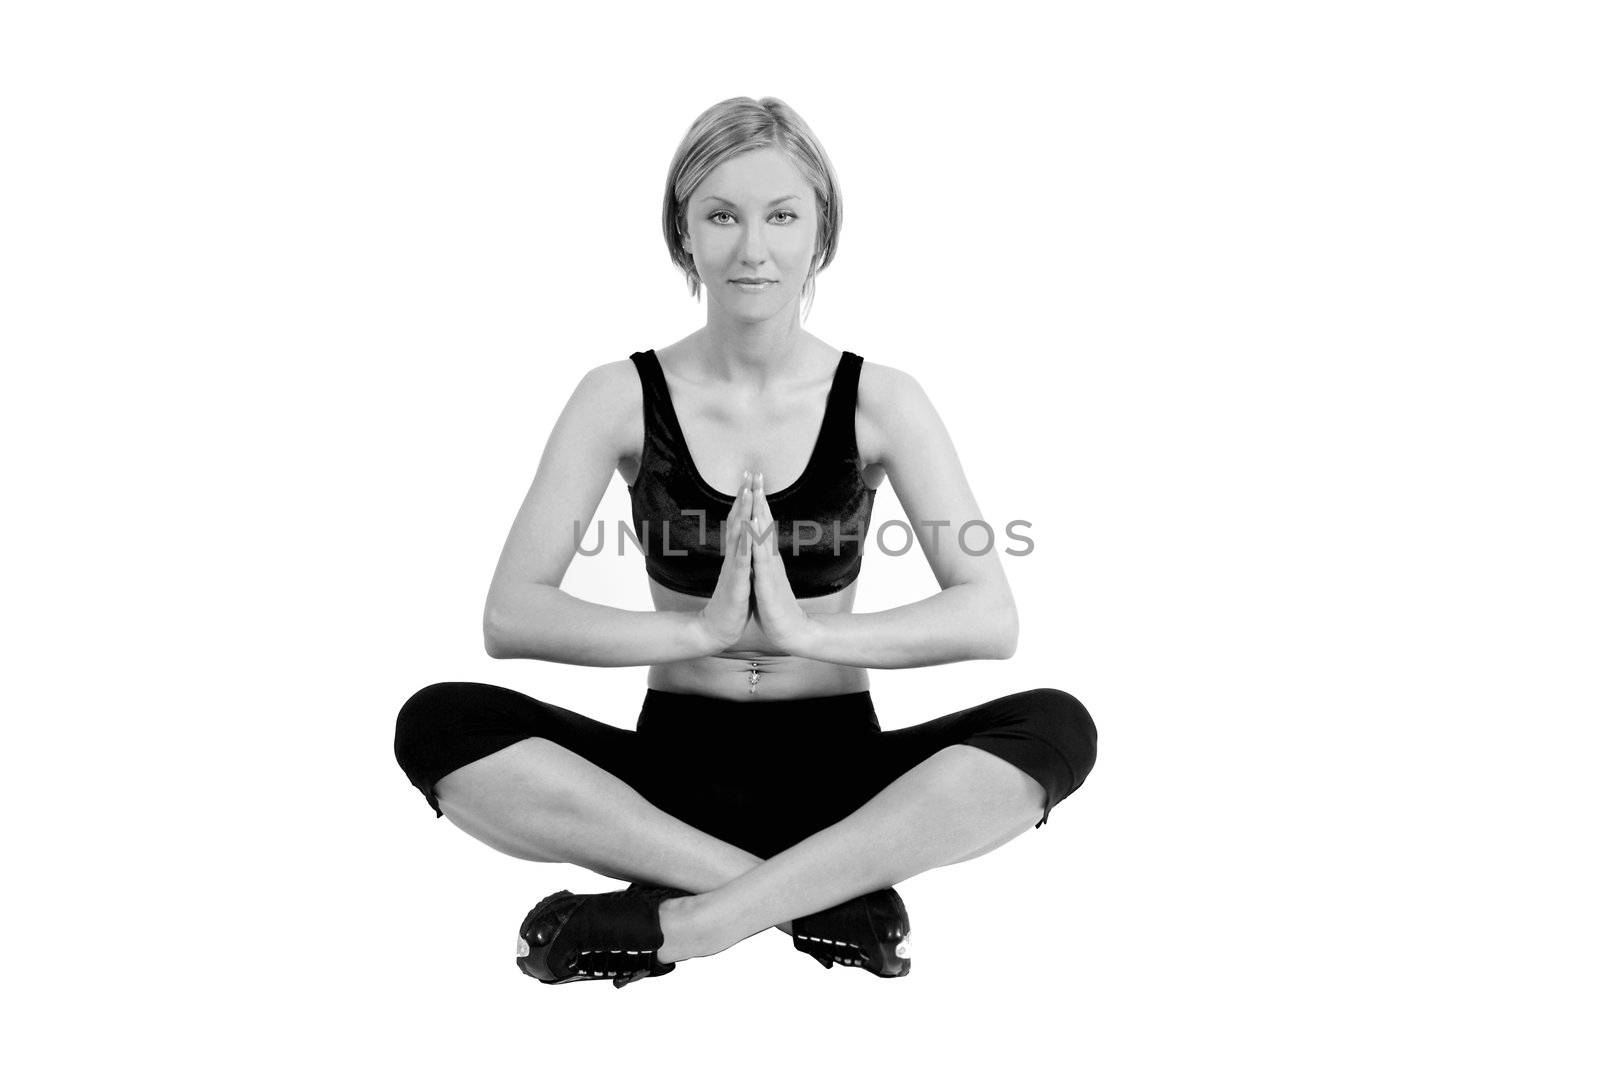 A blond young woman in a fitness outfit is sitting in a lotus position doing yoga. The picture is in B&W.